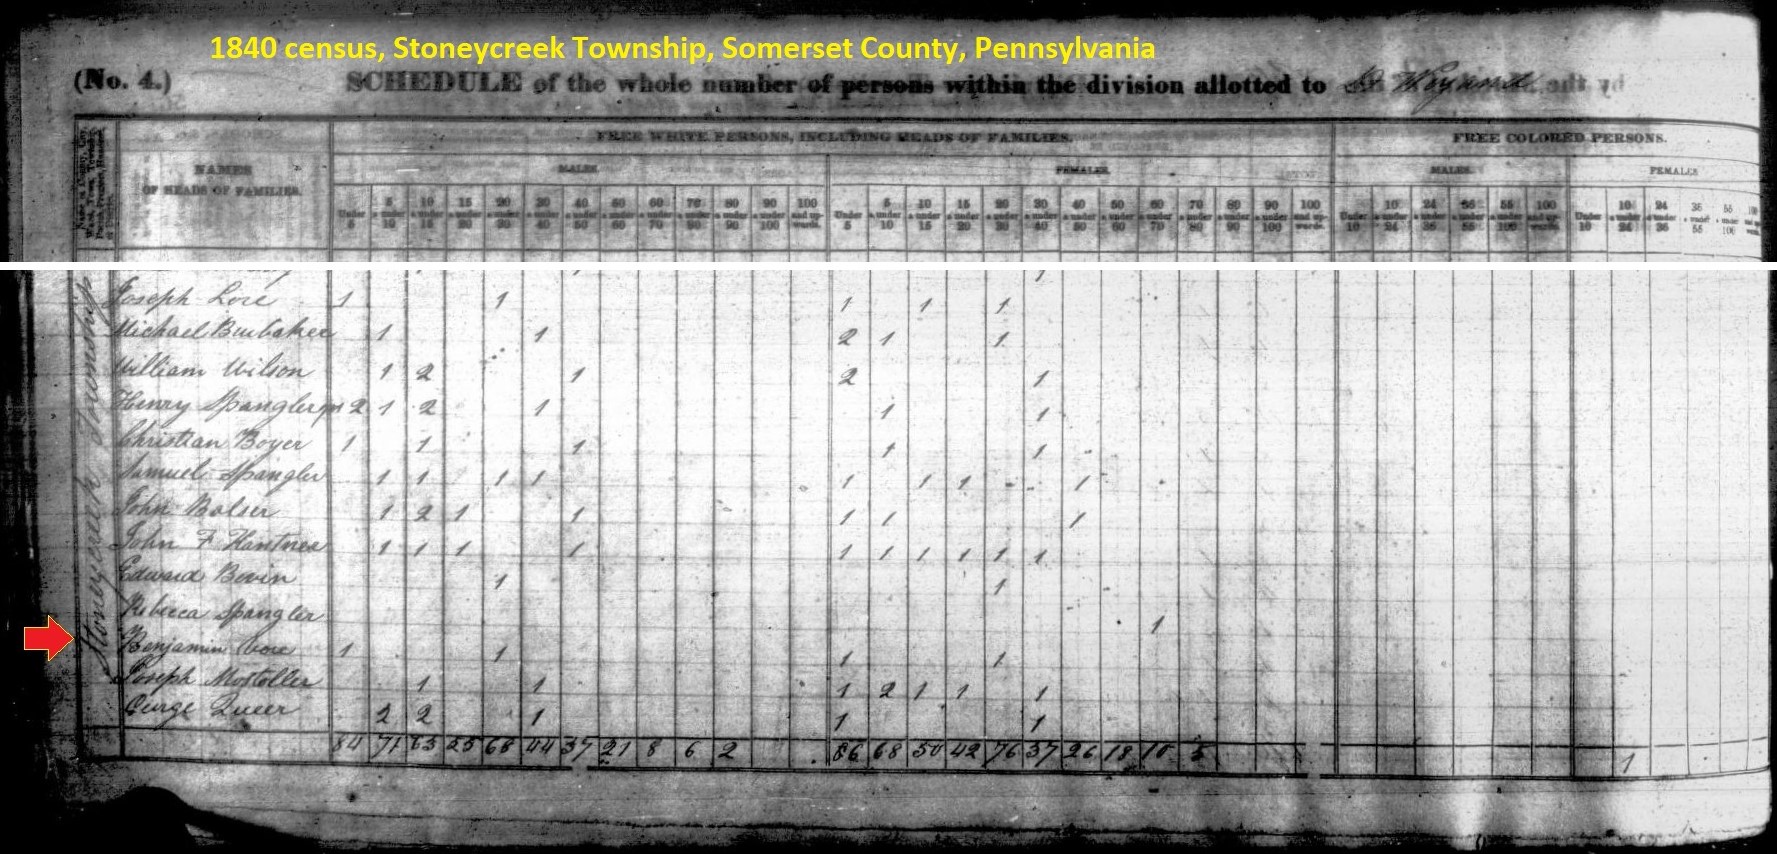 Benjamin Vore in the 1840 census of Stonycreek Township, Somerset County, Pennsylvania.